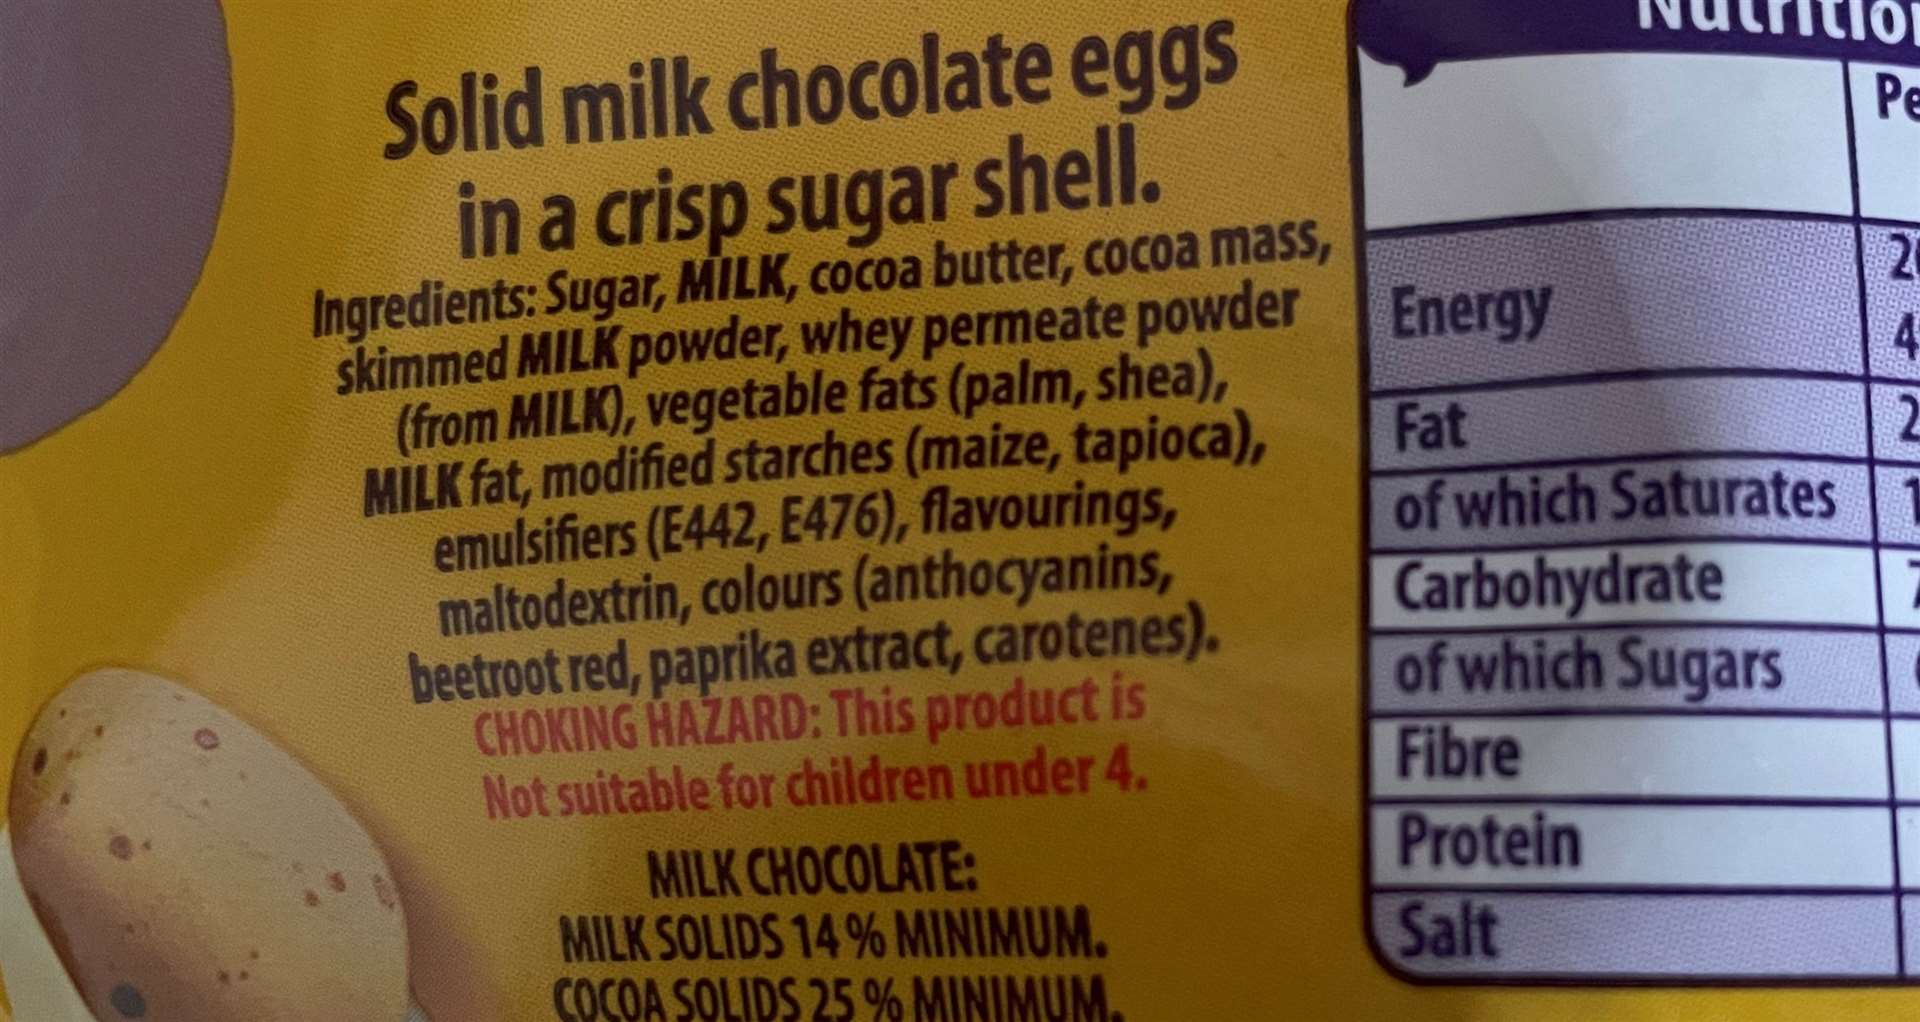 Cadbury places its own warning on packets